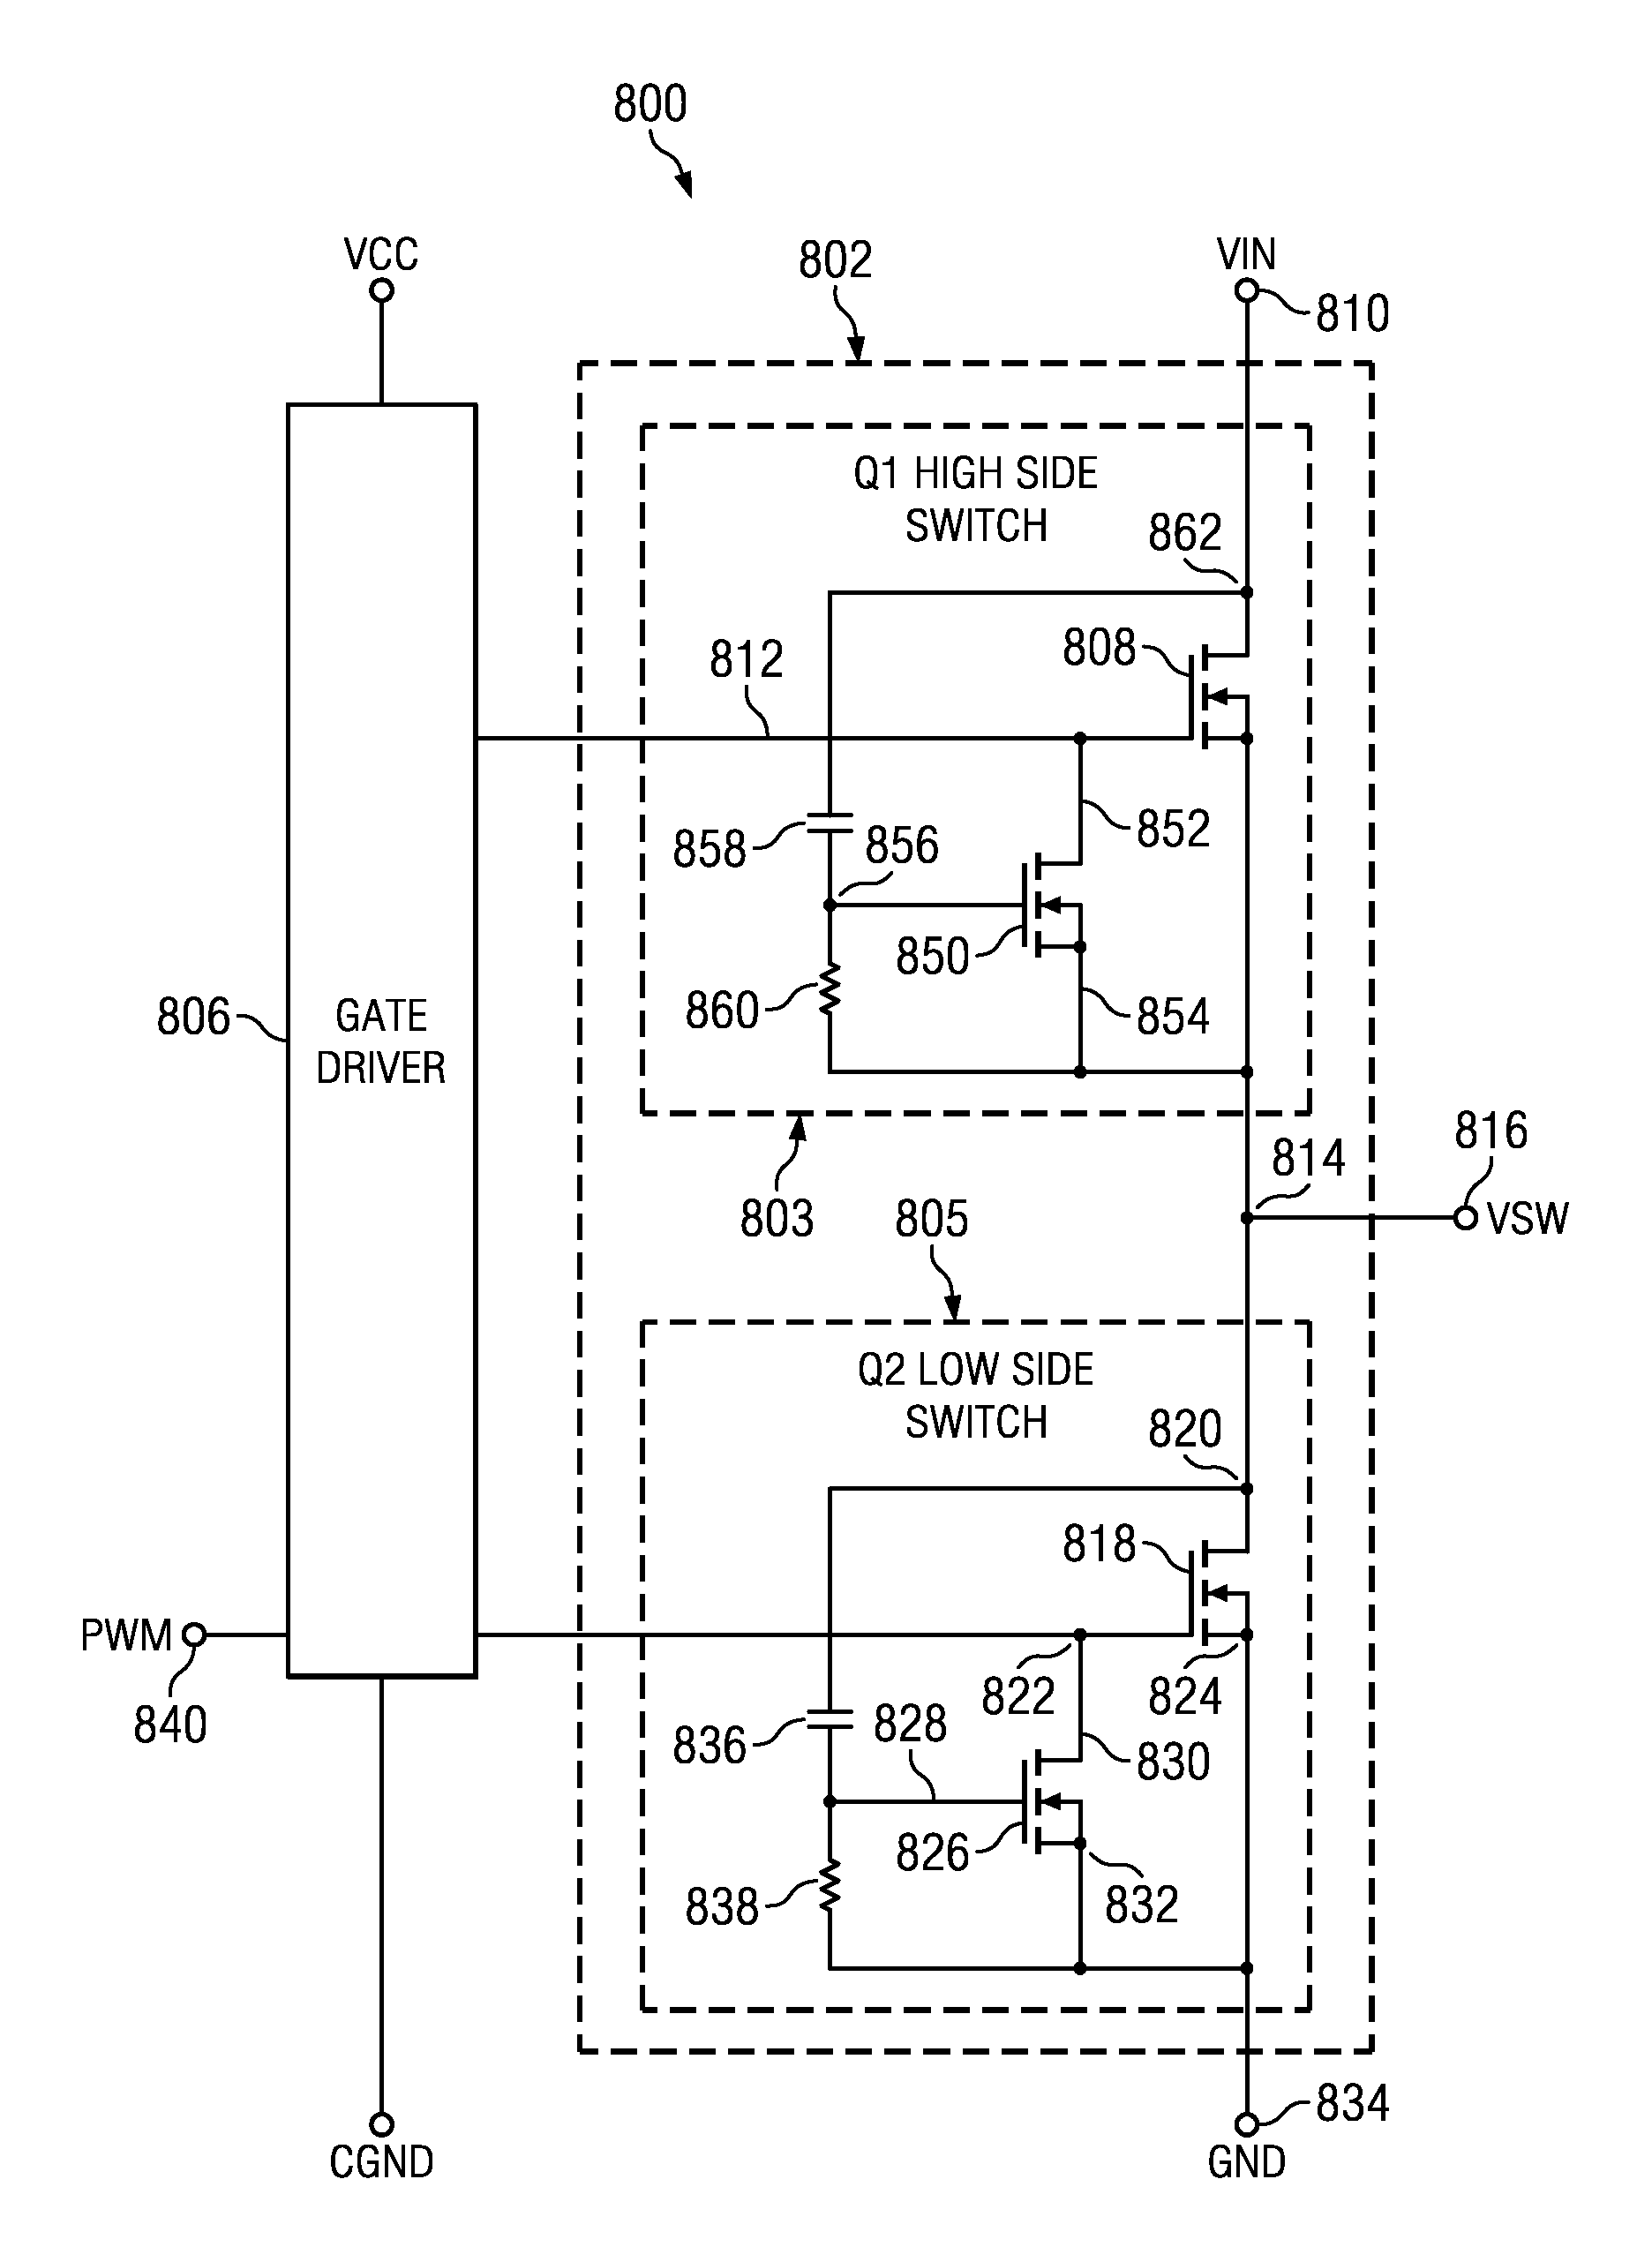 Mosfet with gate pull-down